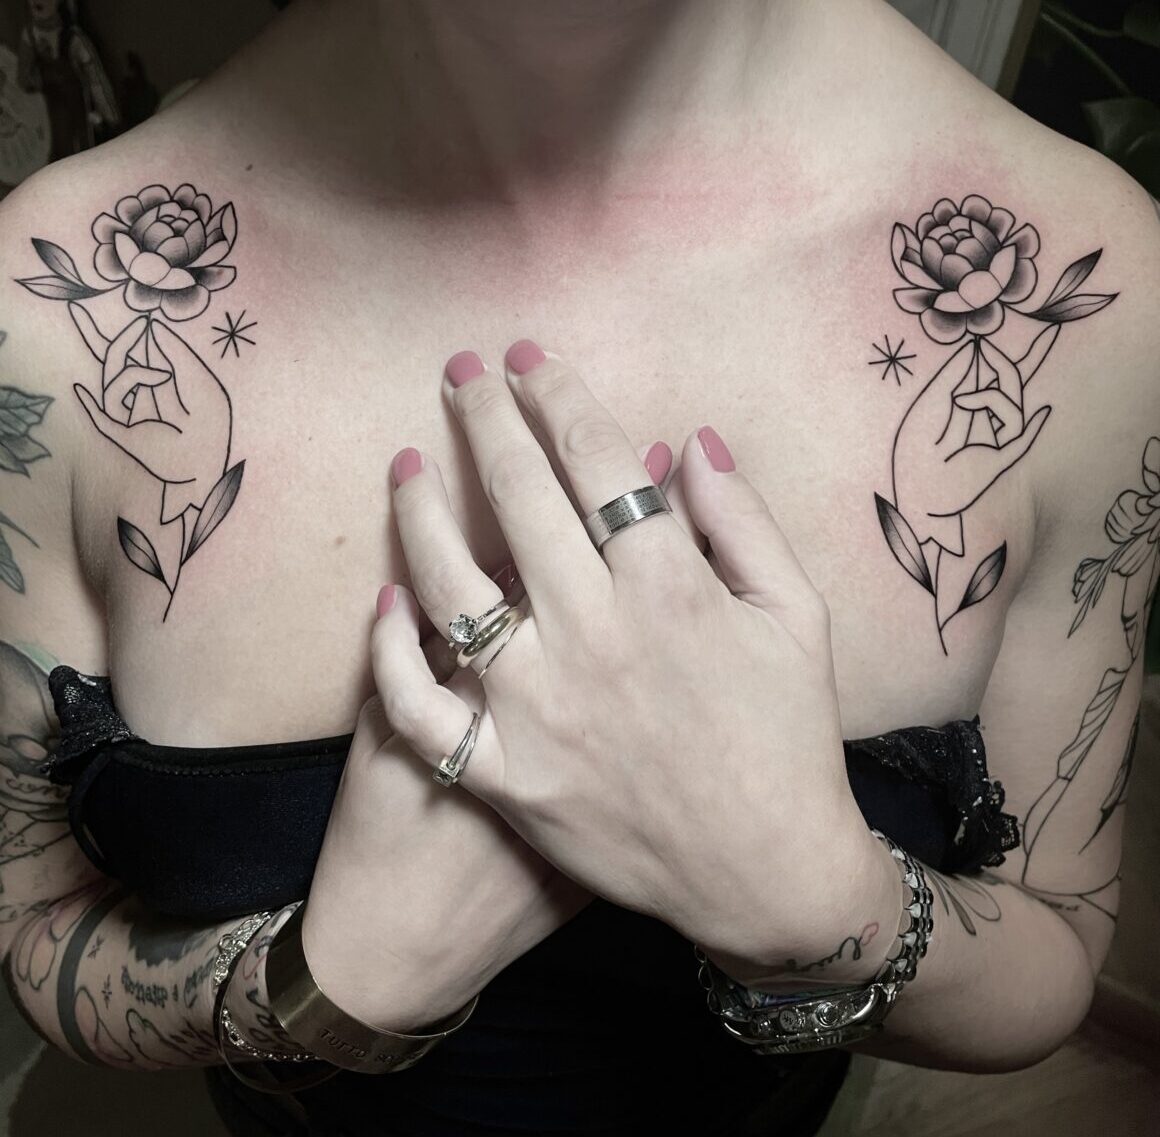 Tattoo by Lucille Ninivaggi, @lucille_roots